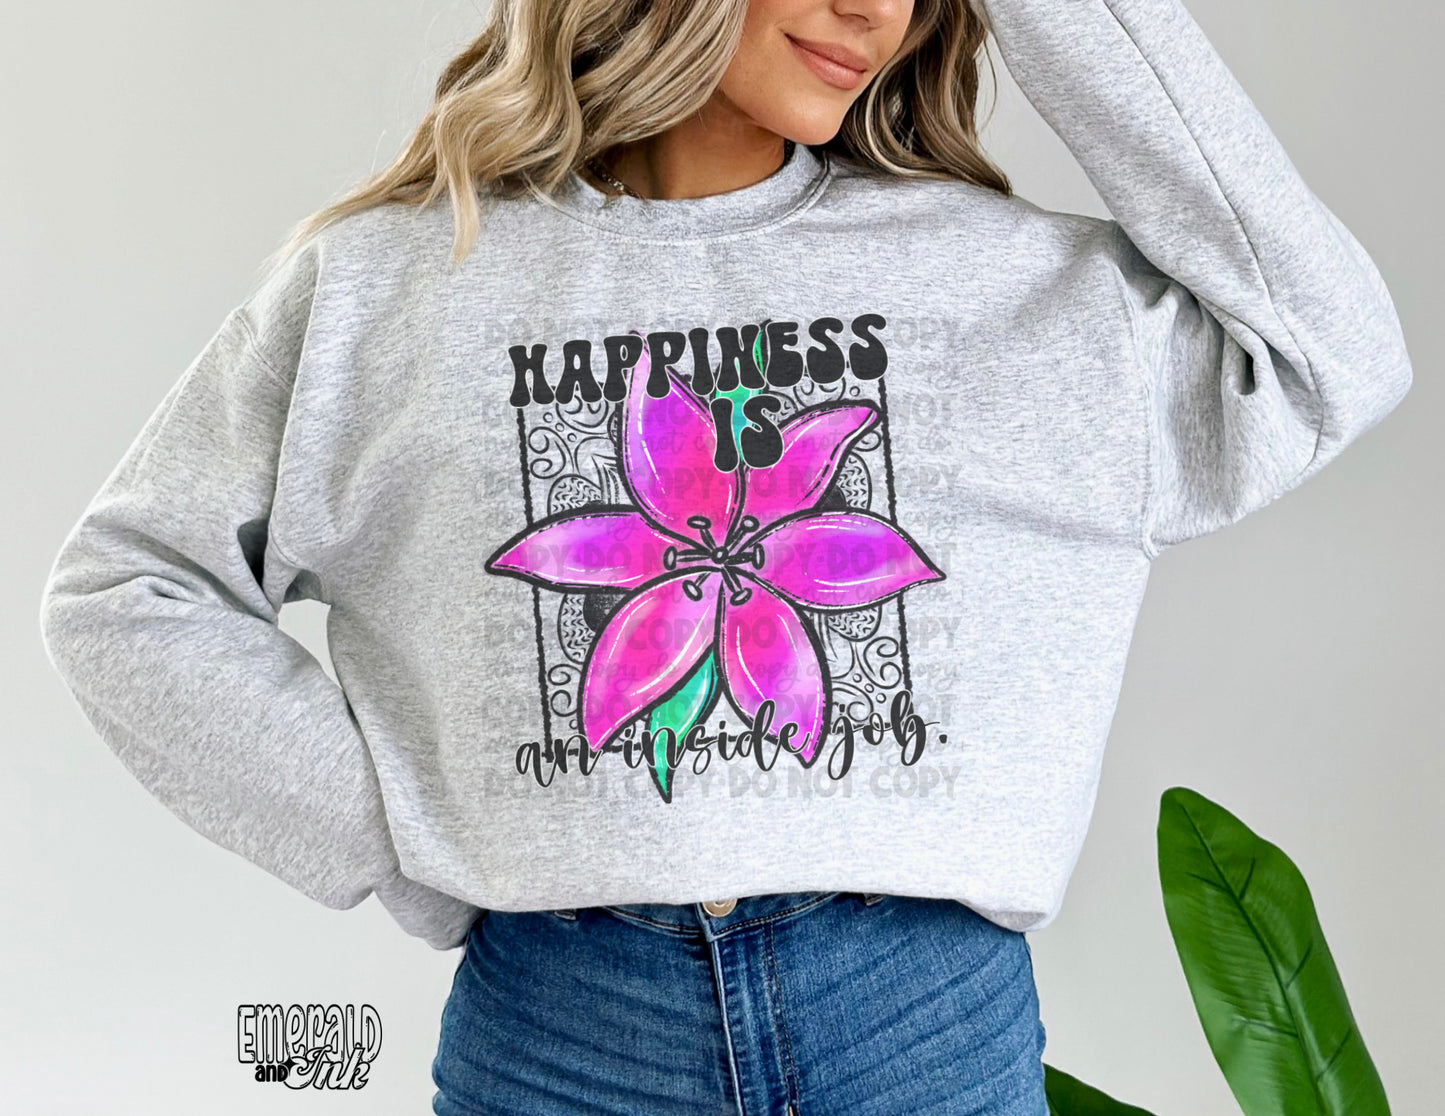 Happiness is an inside job - Adult Size Sublimation Transfer